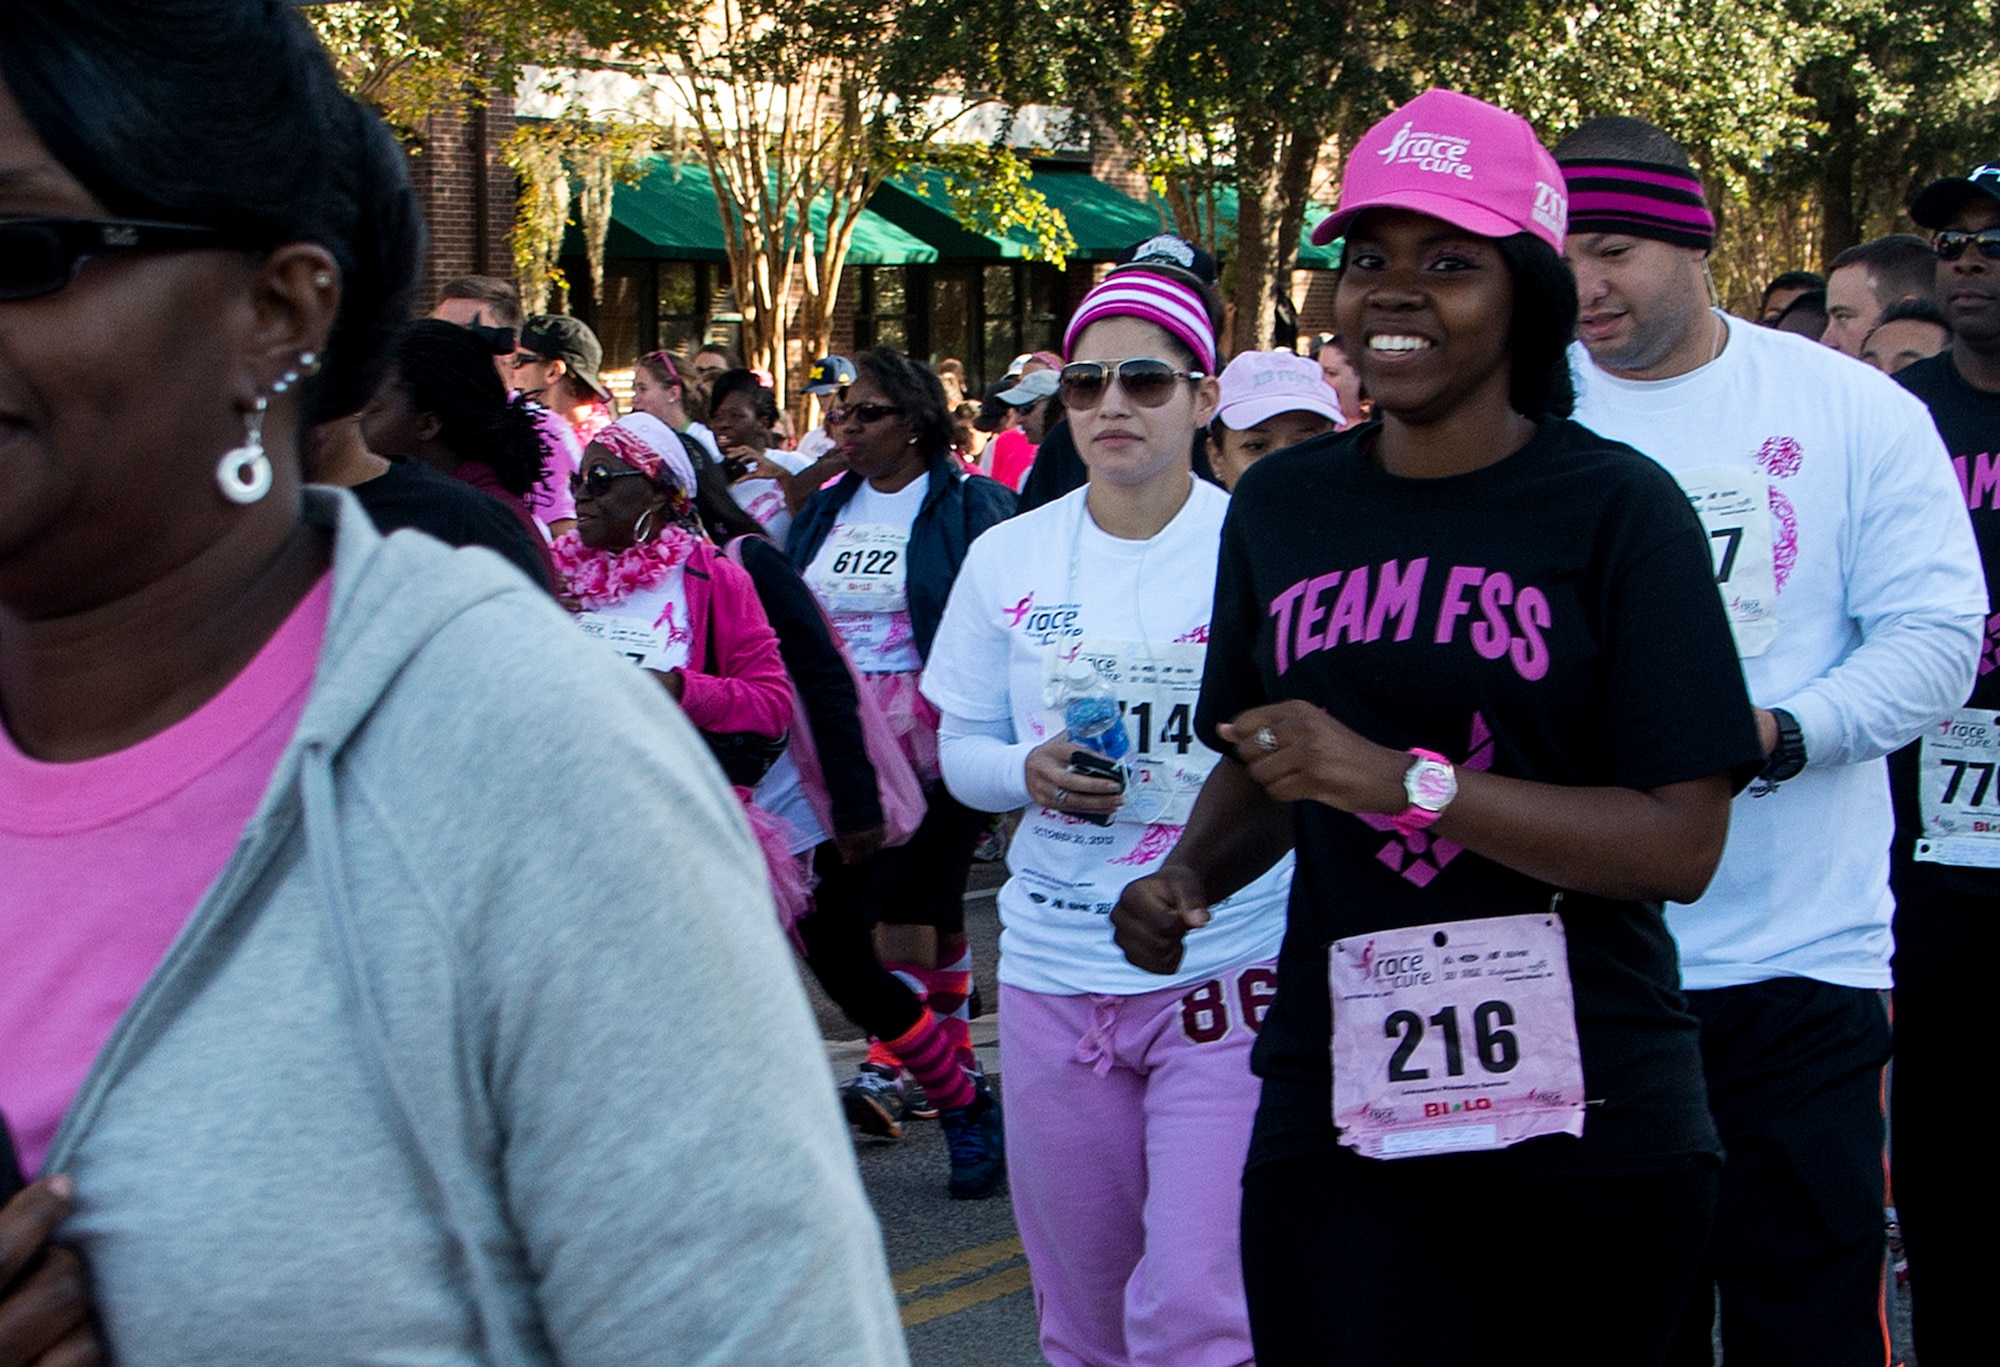 Senior Airman Latisha Chong, breast cancer survivor,, from the 628th Force Support Squadron, runs in the Susan G. Komen Race for the Cure in Charleston, S.C., Oct. 20, 2012.  She was diagnosed with breast cancer Jan. 19, 2012 and was told she was cancer free June 19, 2012.  FSS put together a team of more than 50 runners with the goal of raising $1,000 in donations. The team not only met the $1,000 goal, they exceeded it by more than $700 with donations of $1,700.   (U.S. Air Force/Staff Sgt. Rasheen Douglas)